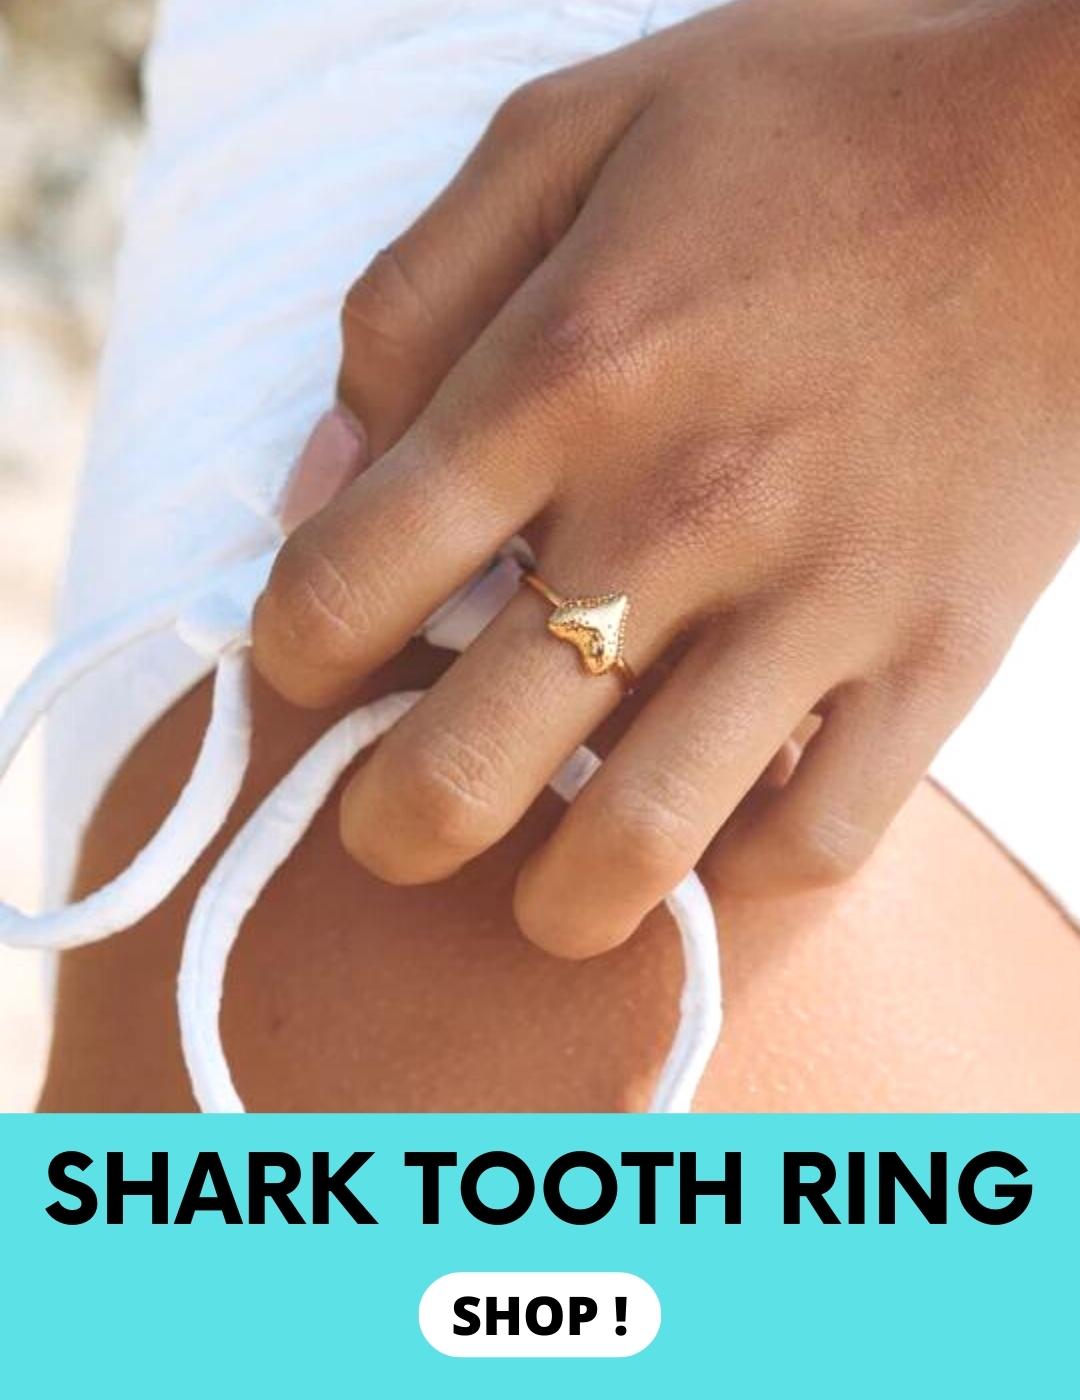 Shark tooth ring